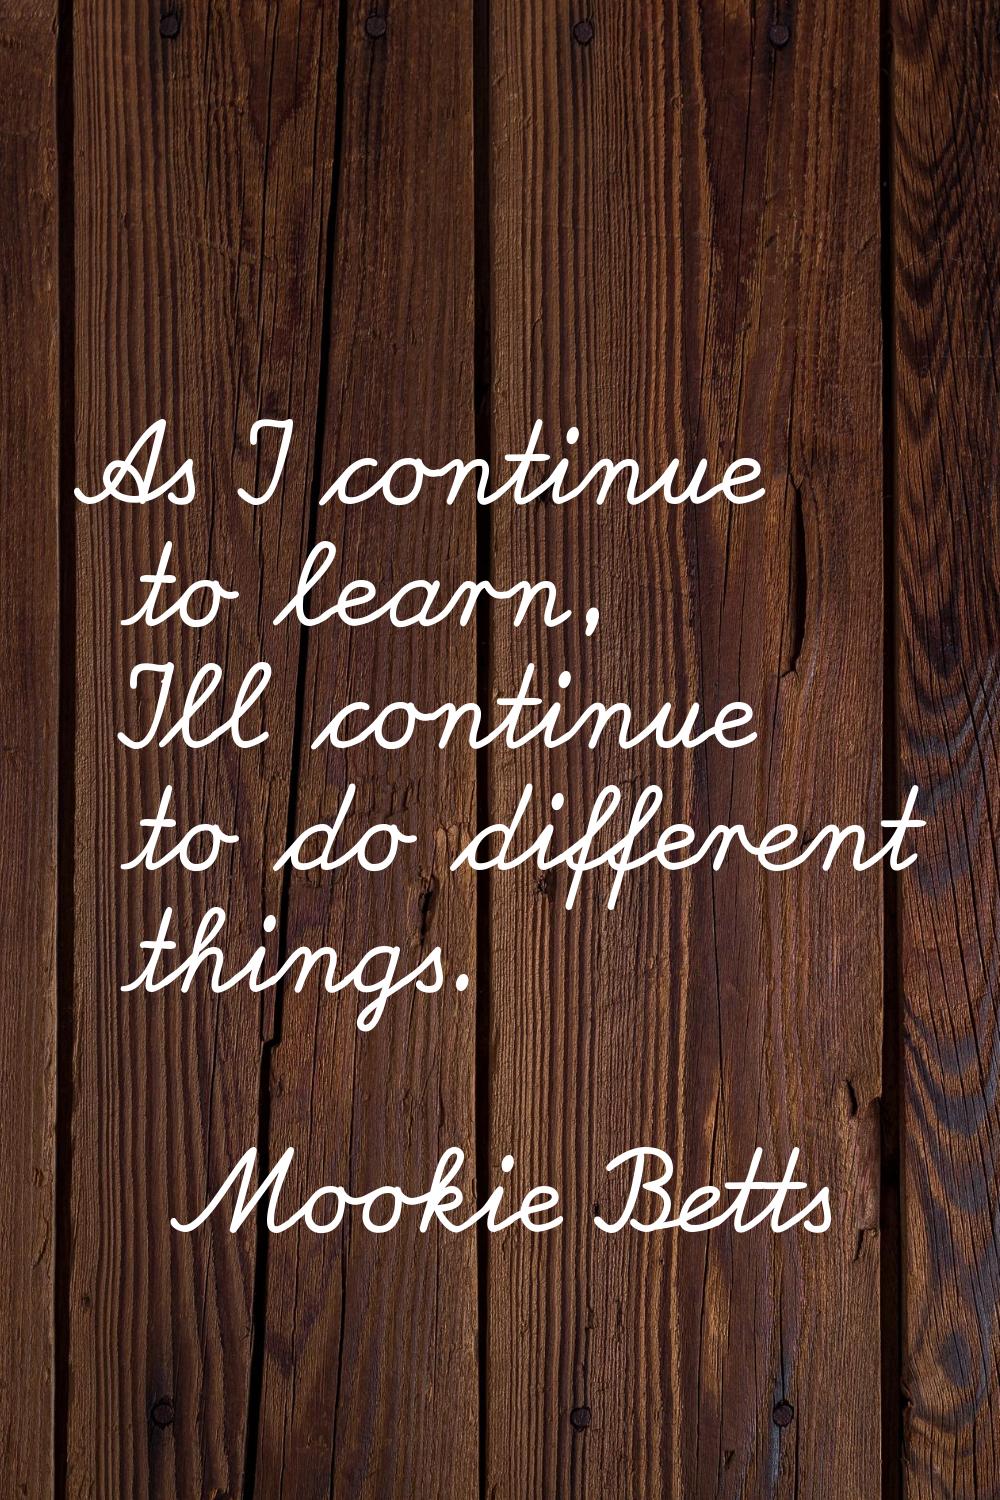 As I continue to learn, I'll continue to do different things.